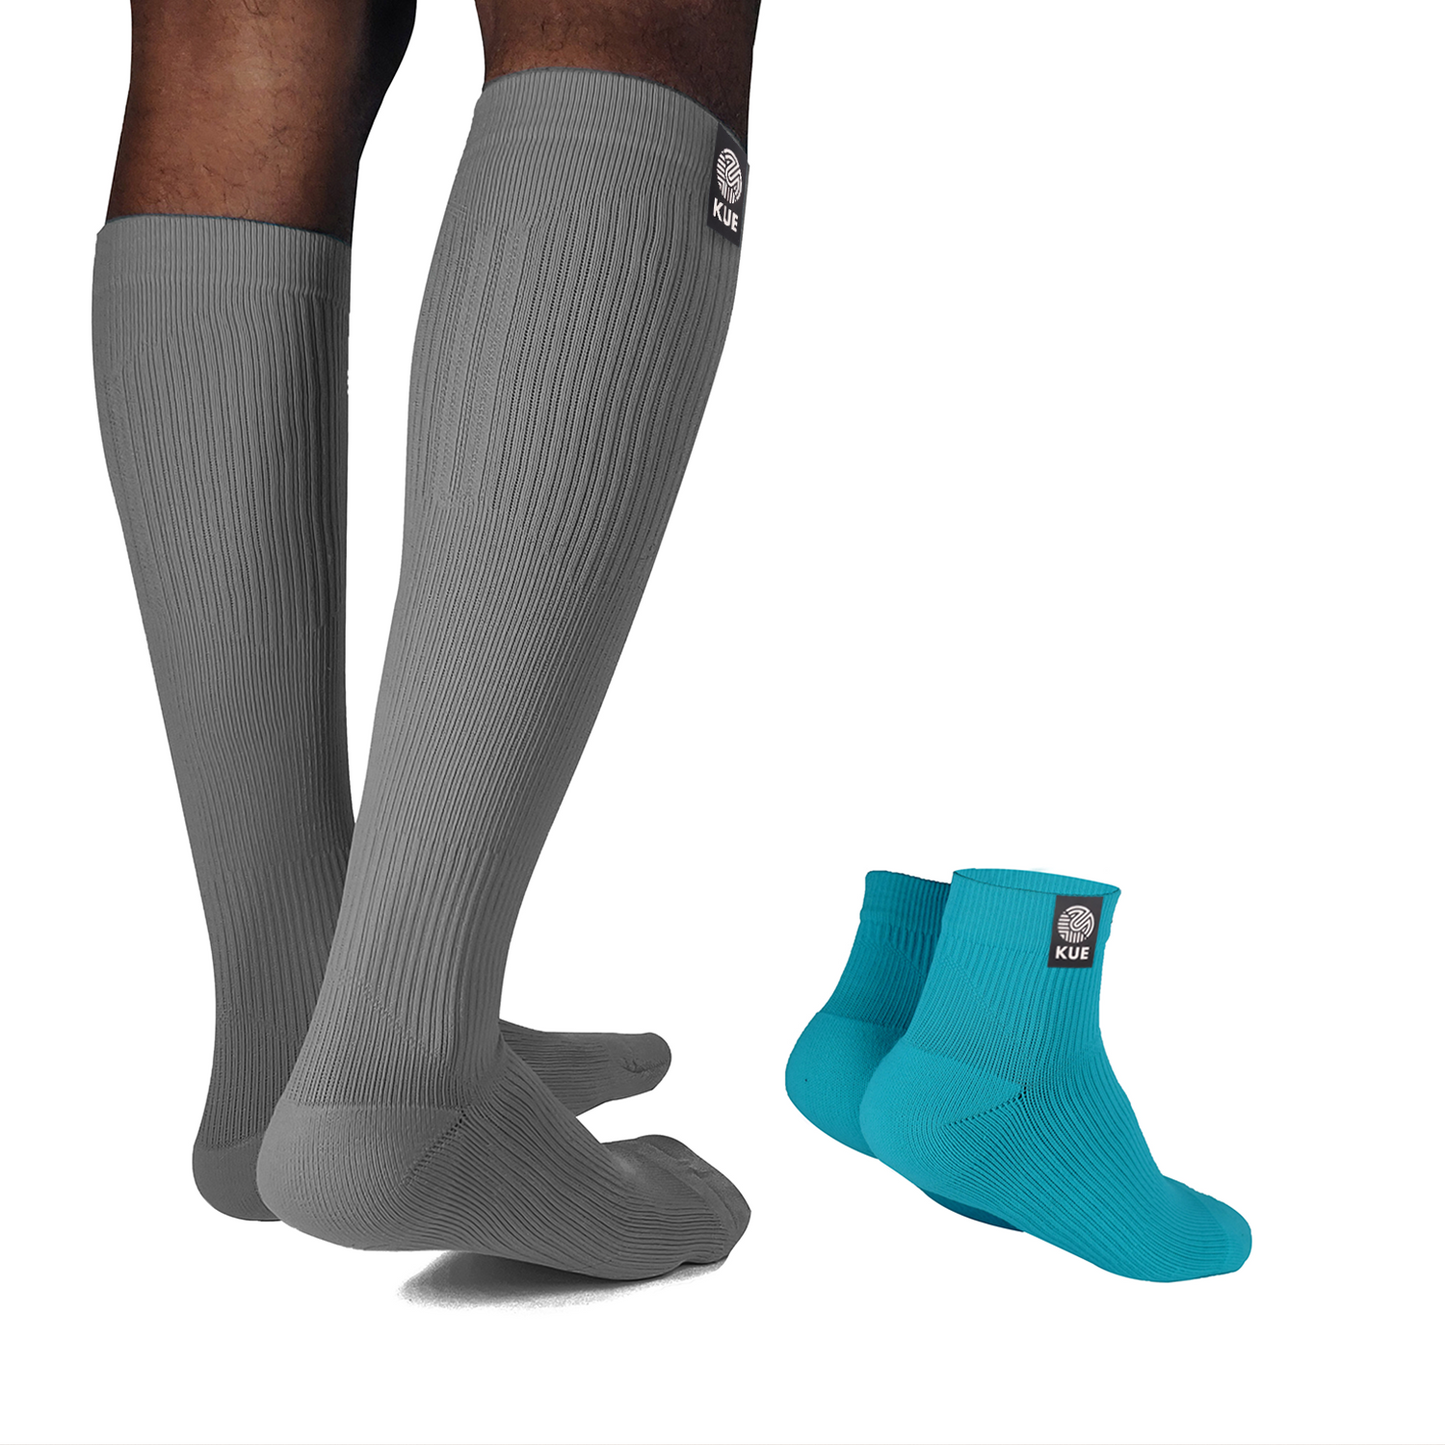 Grey Graduated Compression Knee (18-21mmHg) - Blue Ankle Length Socks (Pair of 2)